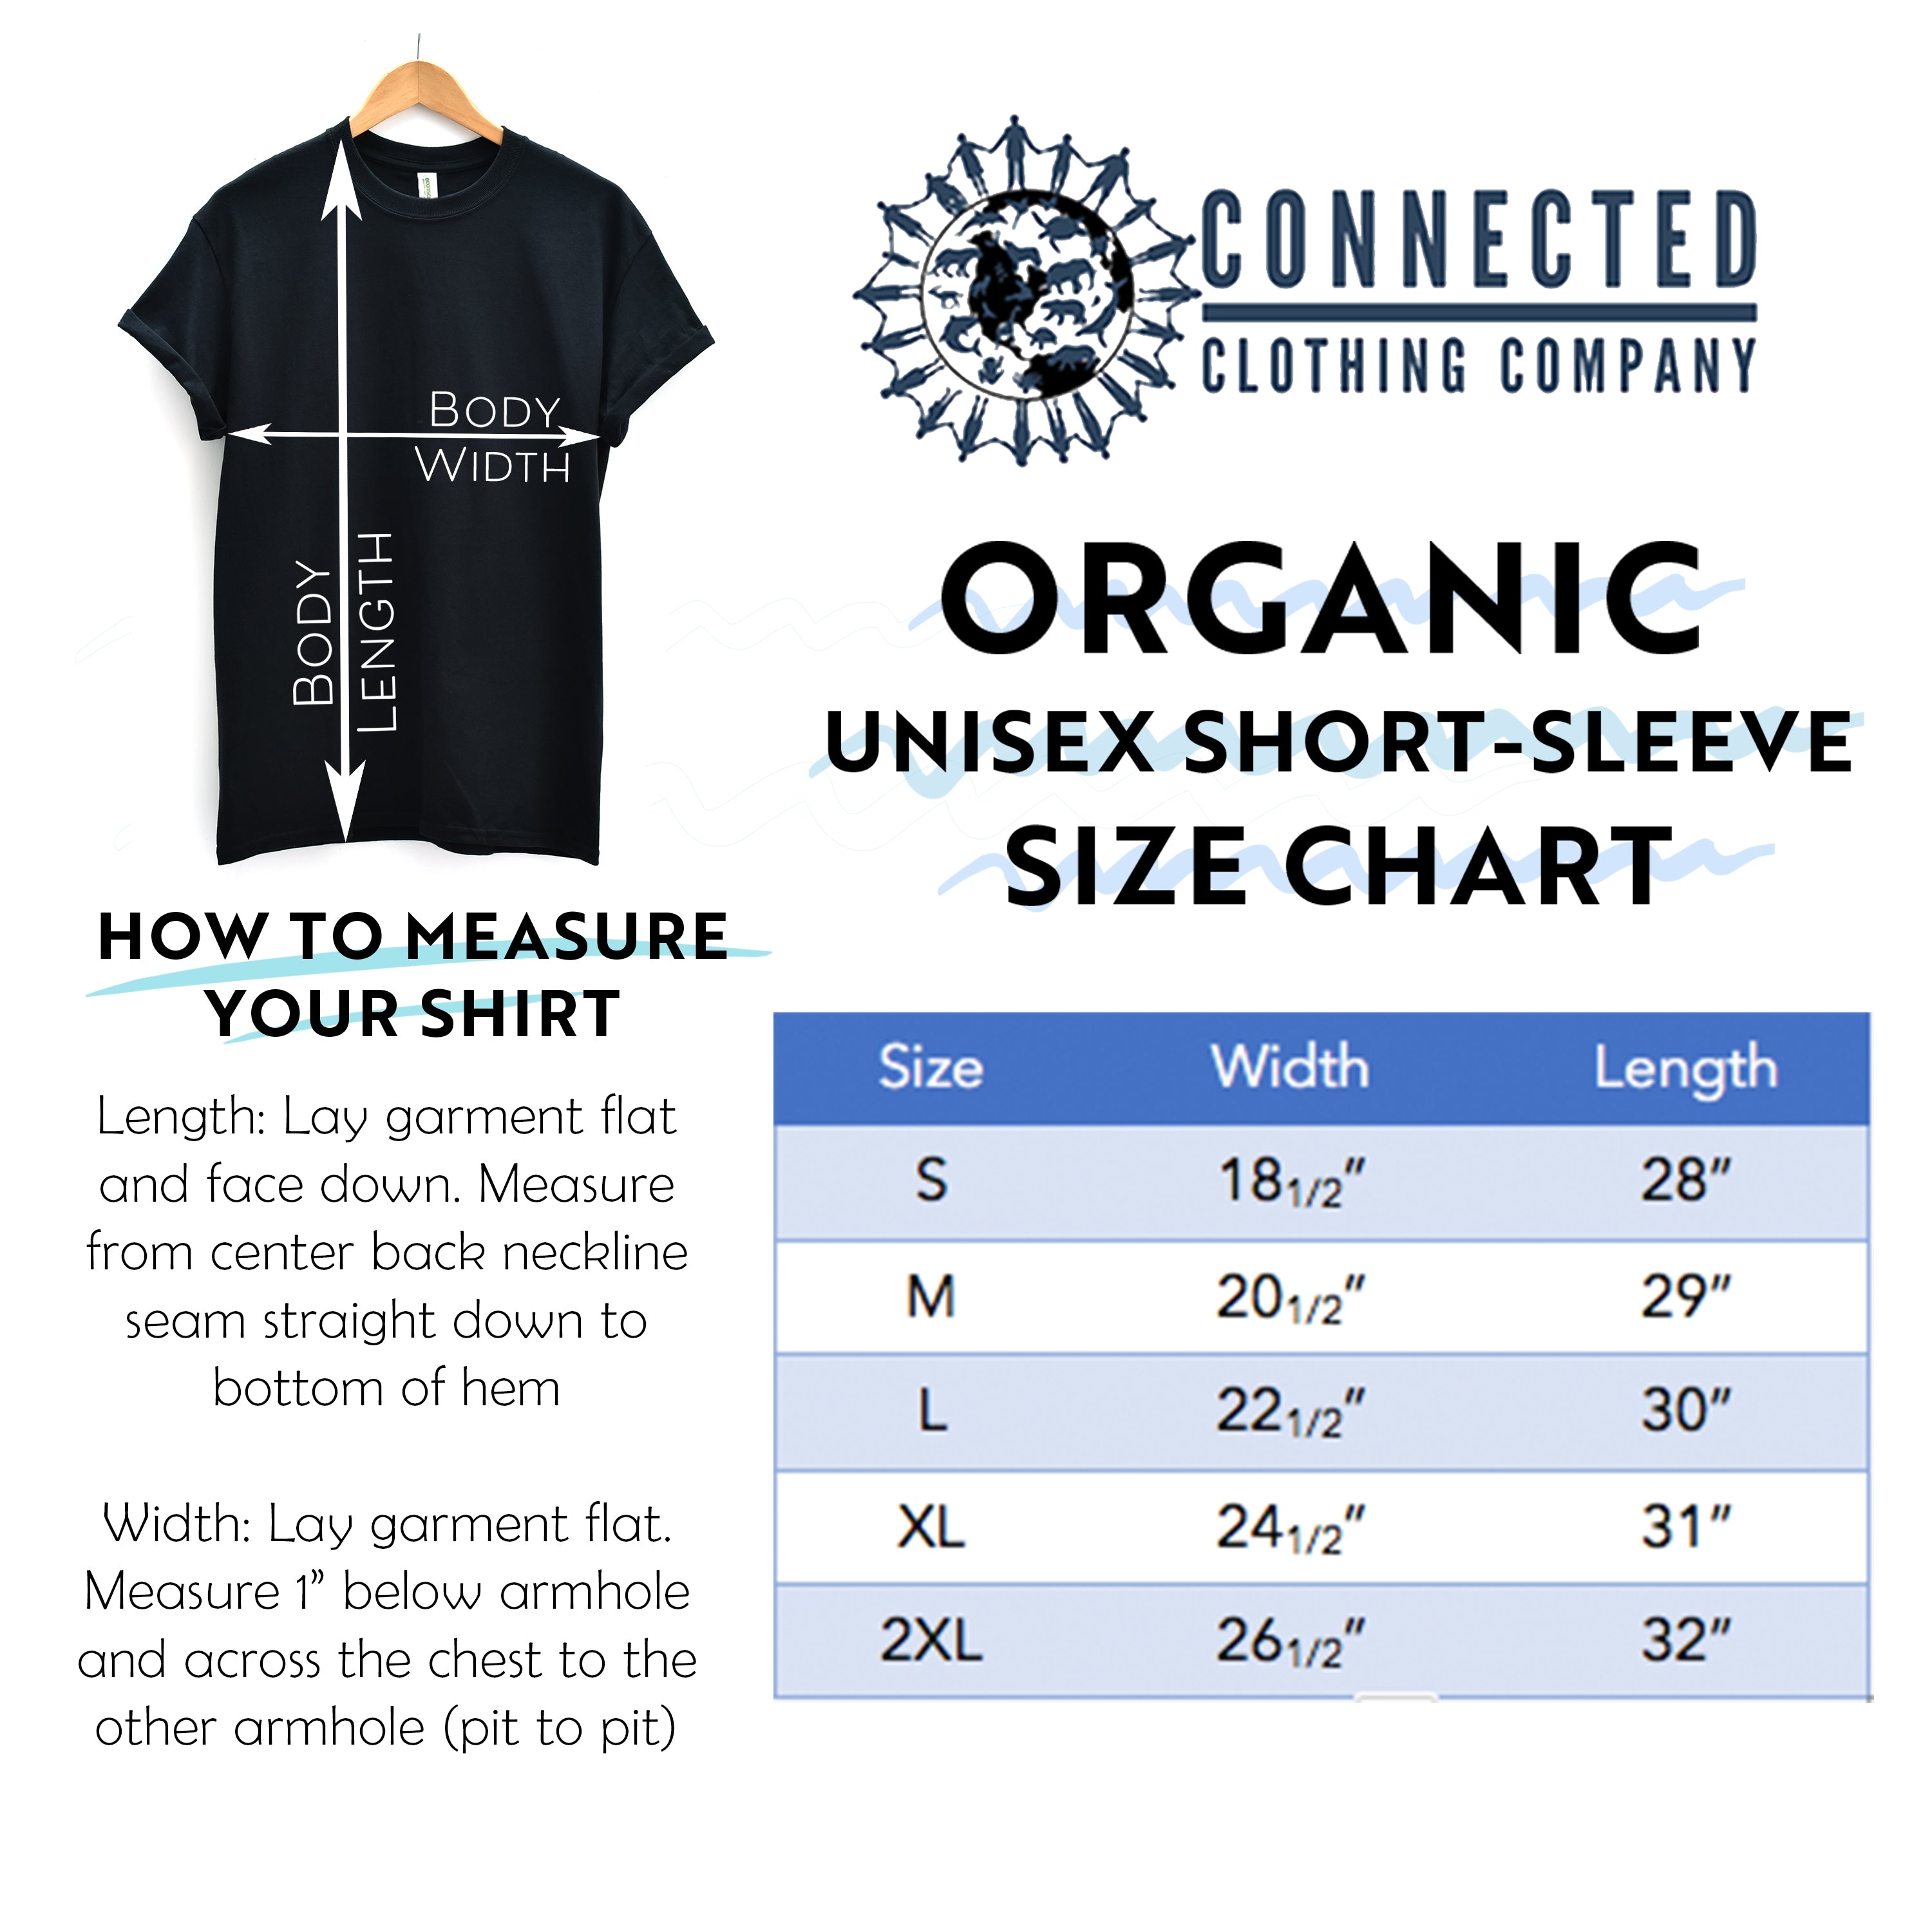 Organic Cotton Unisex Short-Sleeve Tee Size Chart - sharonkornman - Ethically and Sustainably Made - 10% donated to Mission Blue ocean conservation